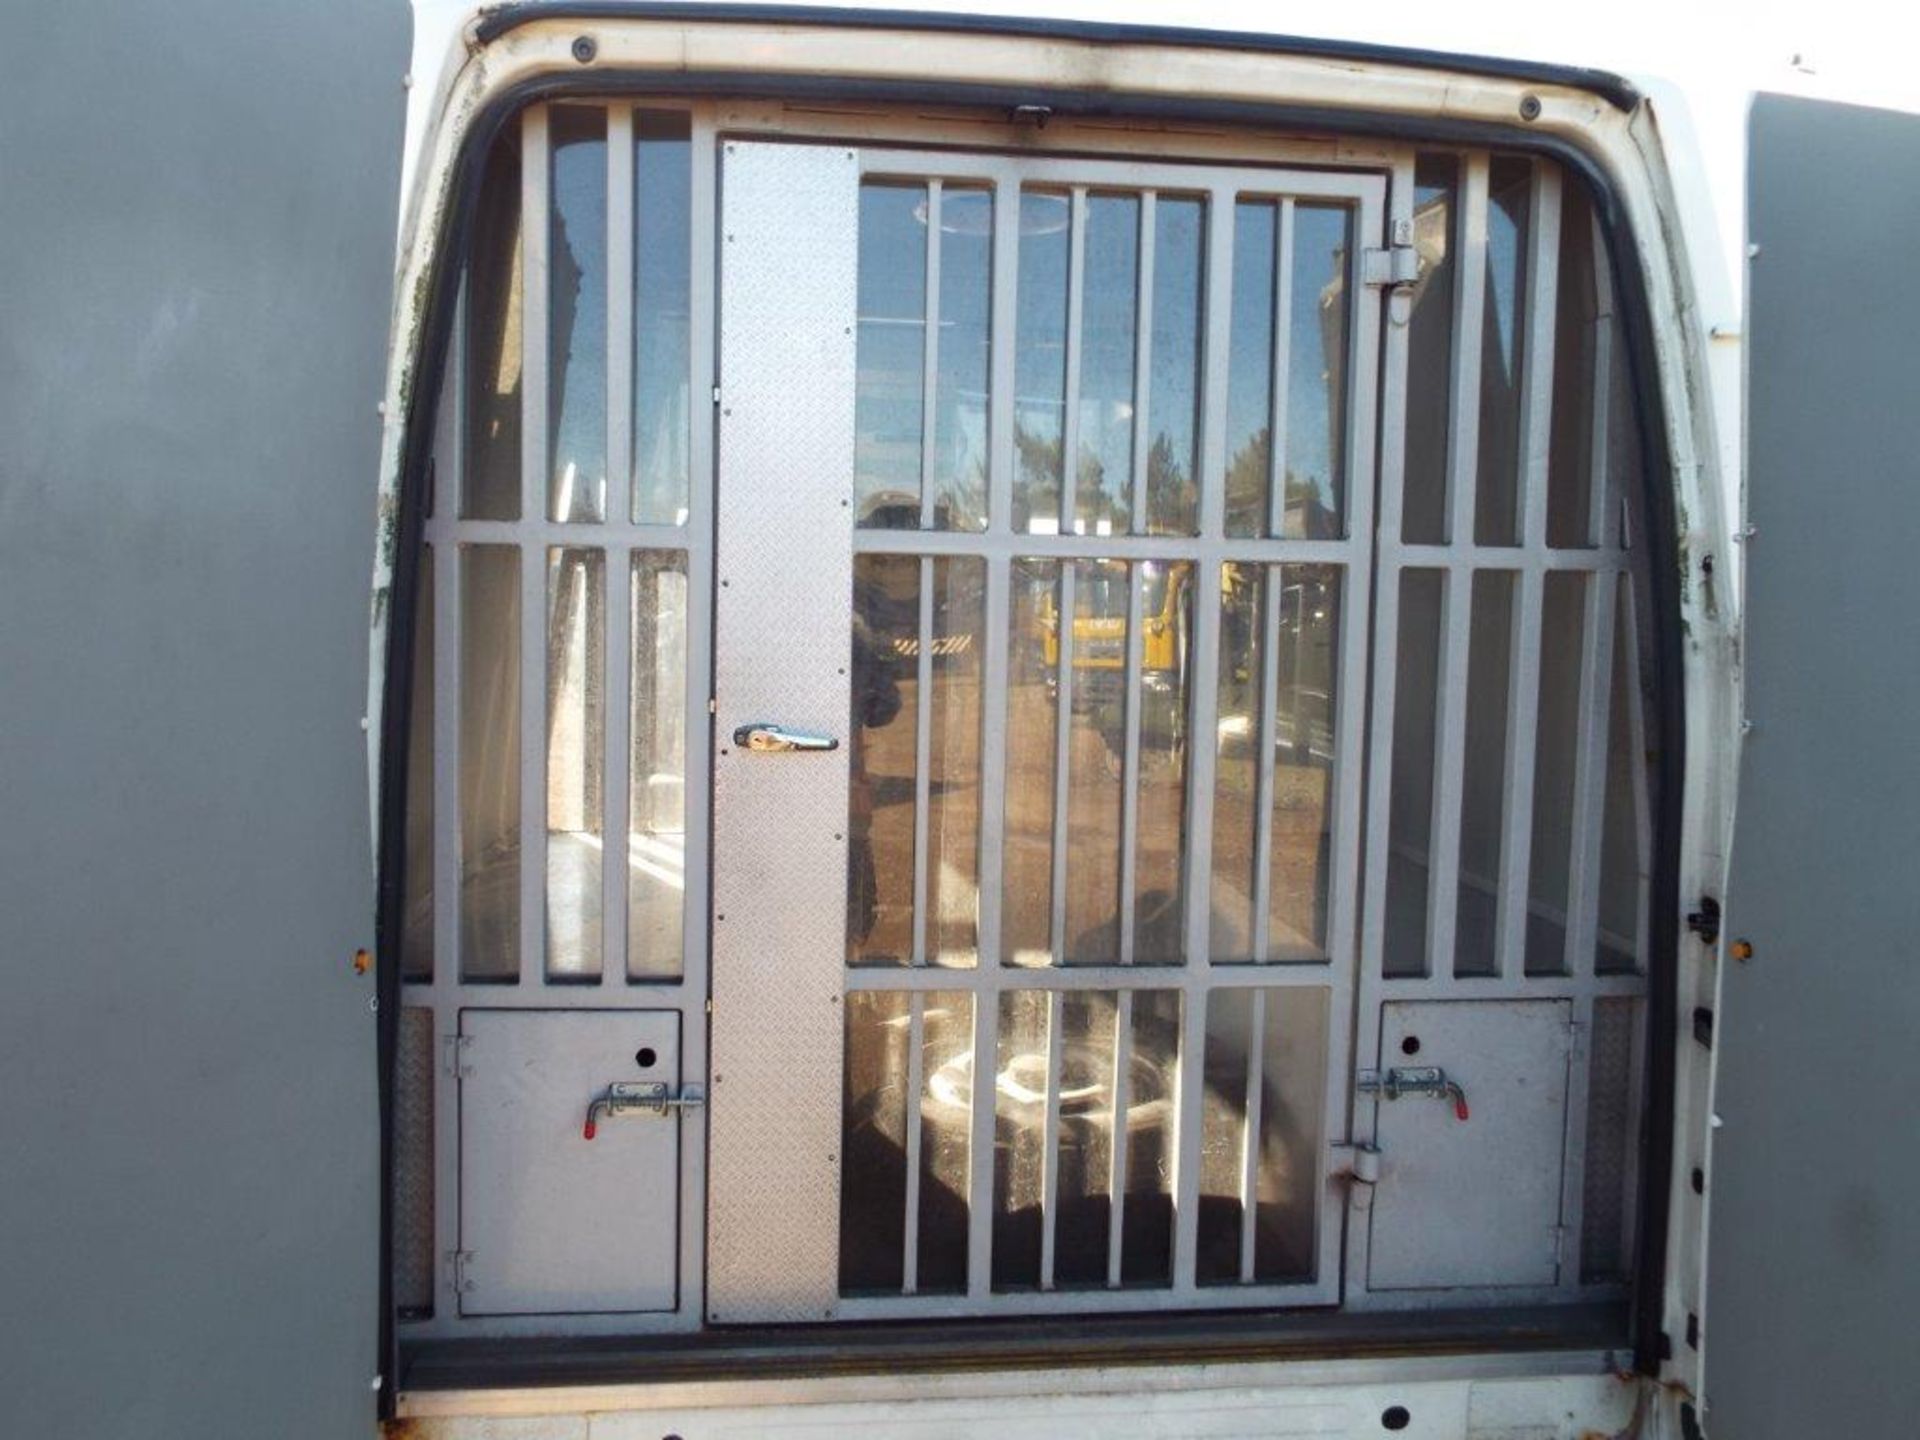 Ford Transit 330 SWB Crew Cab Panel Van with Rear Security Cage - Image 16 of 26